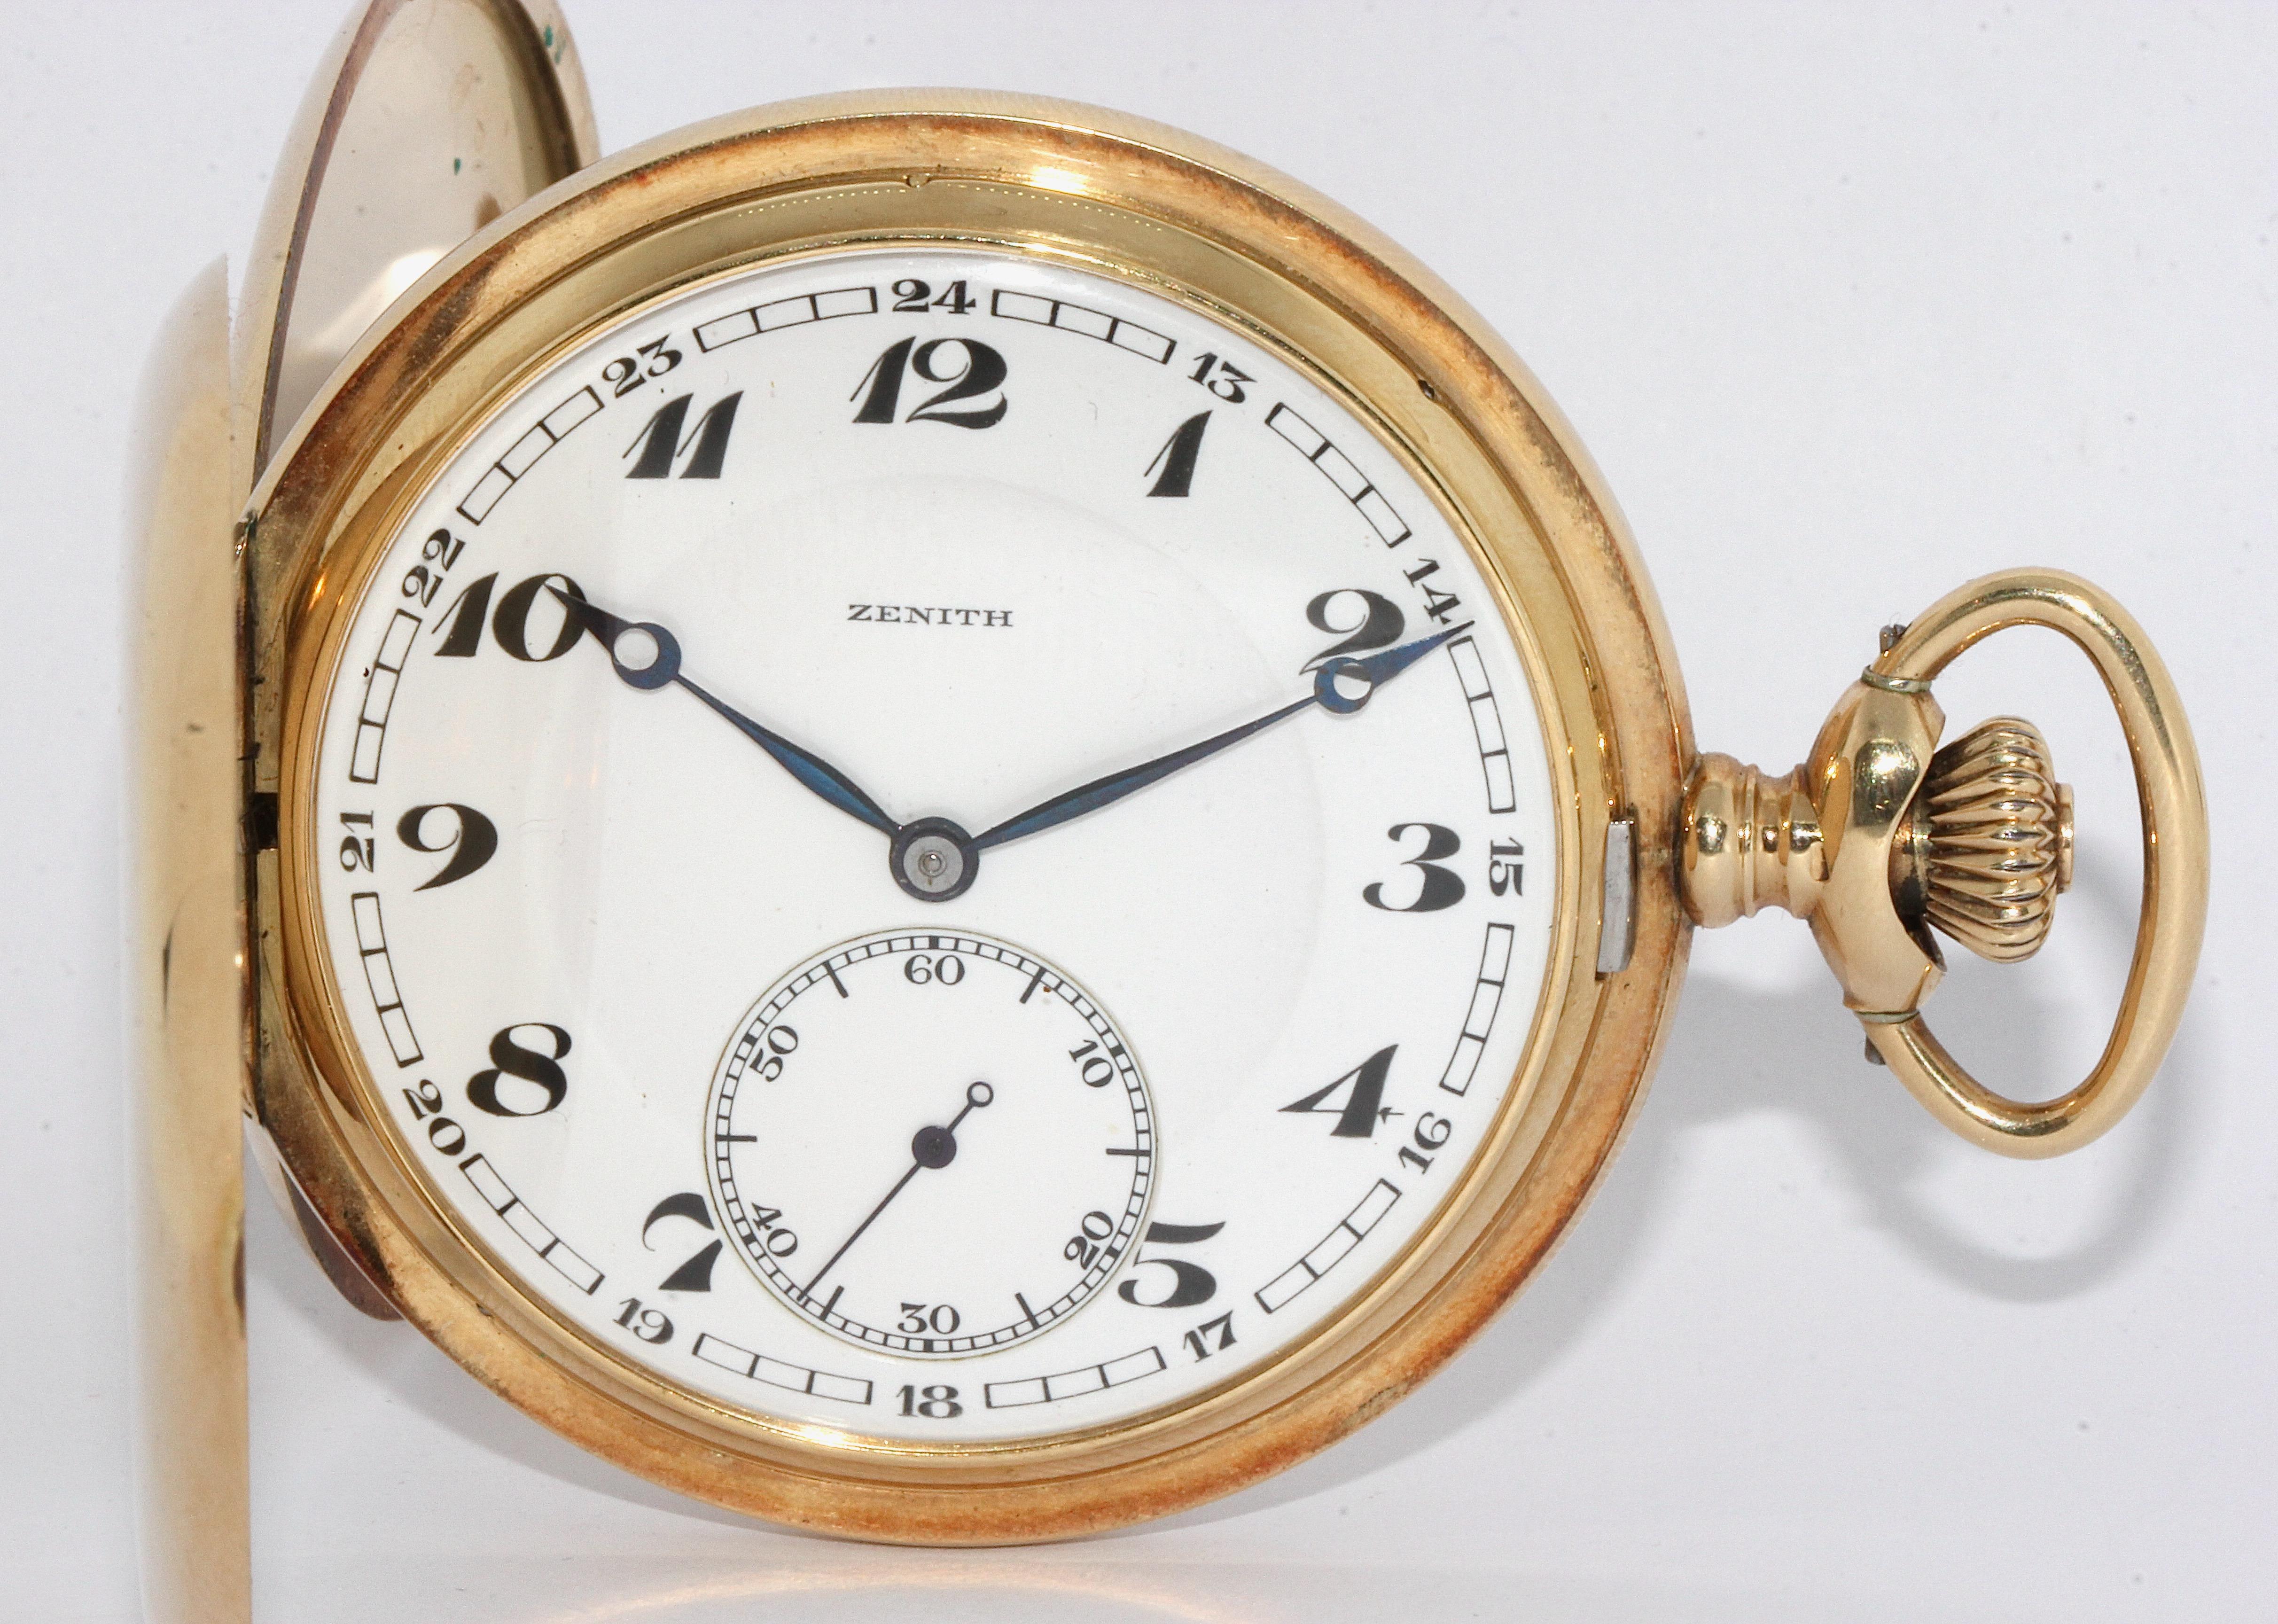 Antique Zenith 14 karat gold pocket watch, savonette. Enamel dial with Arabic numbers.

Pocket watch can be wound and works.
Original, very good condition.

Meaning of the dedication:

